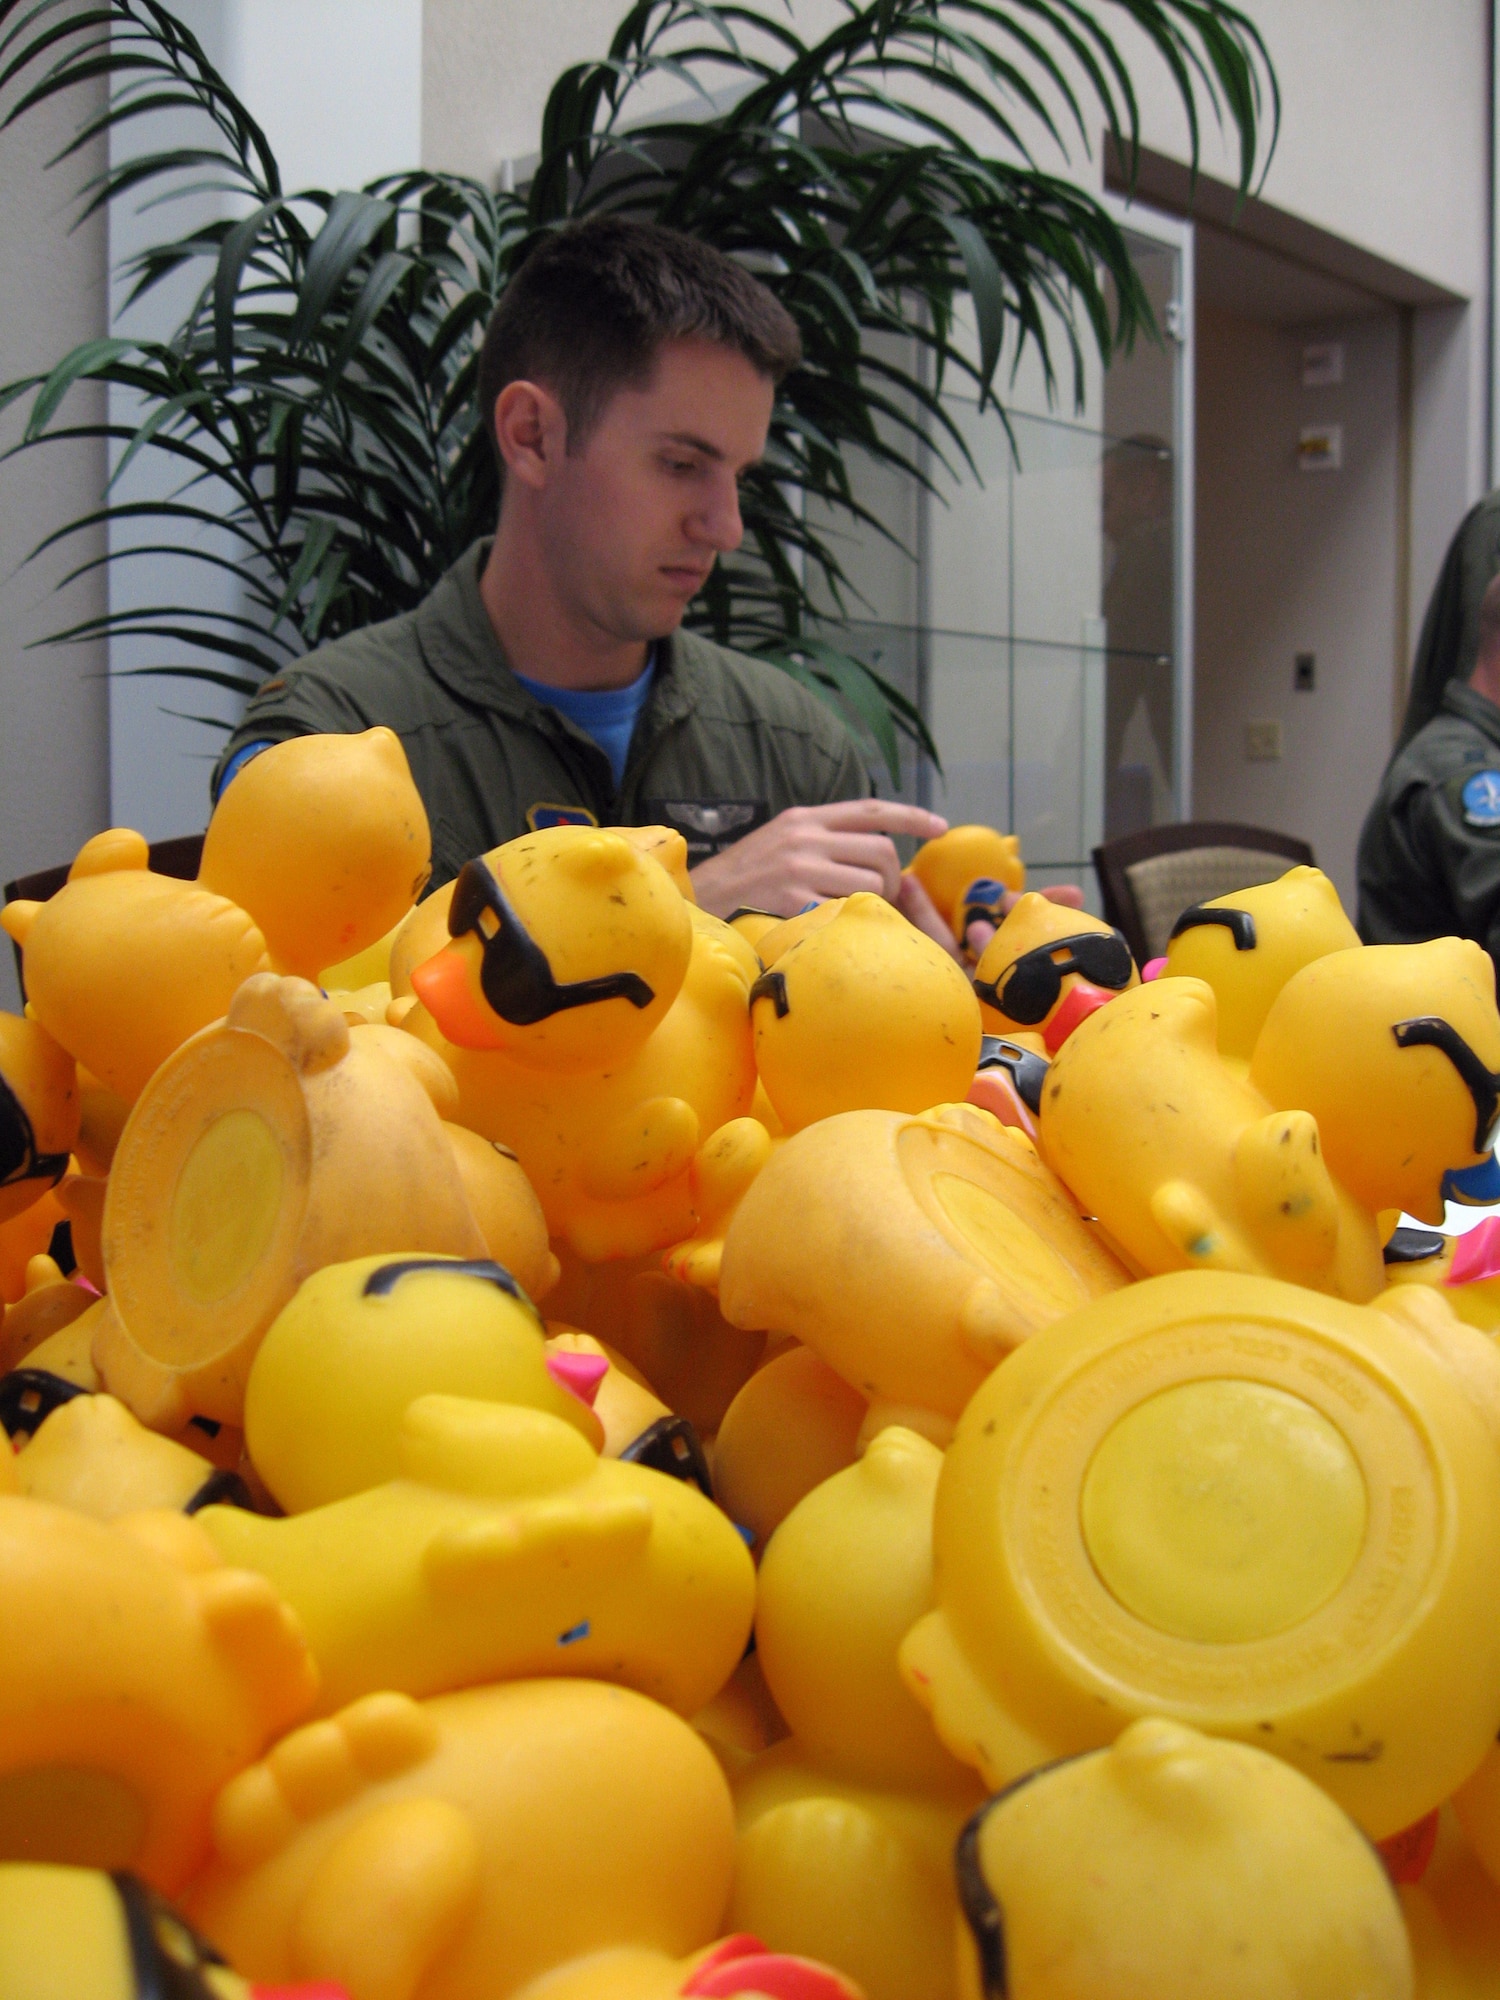 Second Lt. Brandon Liabenow works though a pile of rubber ducks April 18 that are set to race in the 2nd Annual Children's Miracle Network Rubber Duck Rivery Derby in May. Lieutenant Liabenow and other 80th Operations Support Squadron personnel and family members and CMN representatives placed numbers on about 10,000 rubber ducks in preparation of the race. (U.S. Air Force photo/Mike McKito)